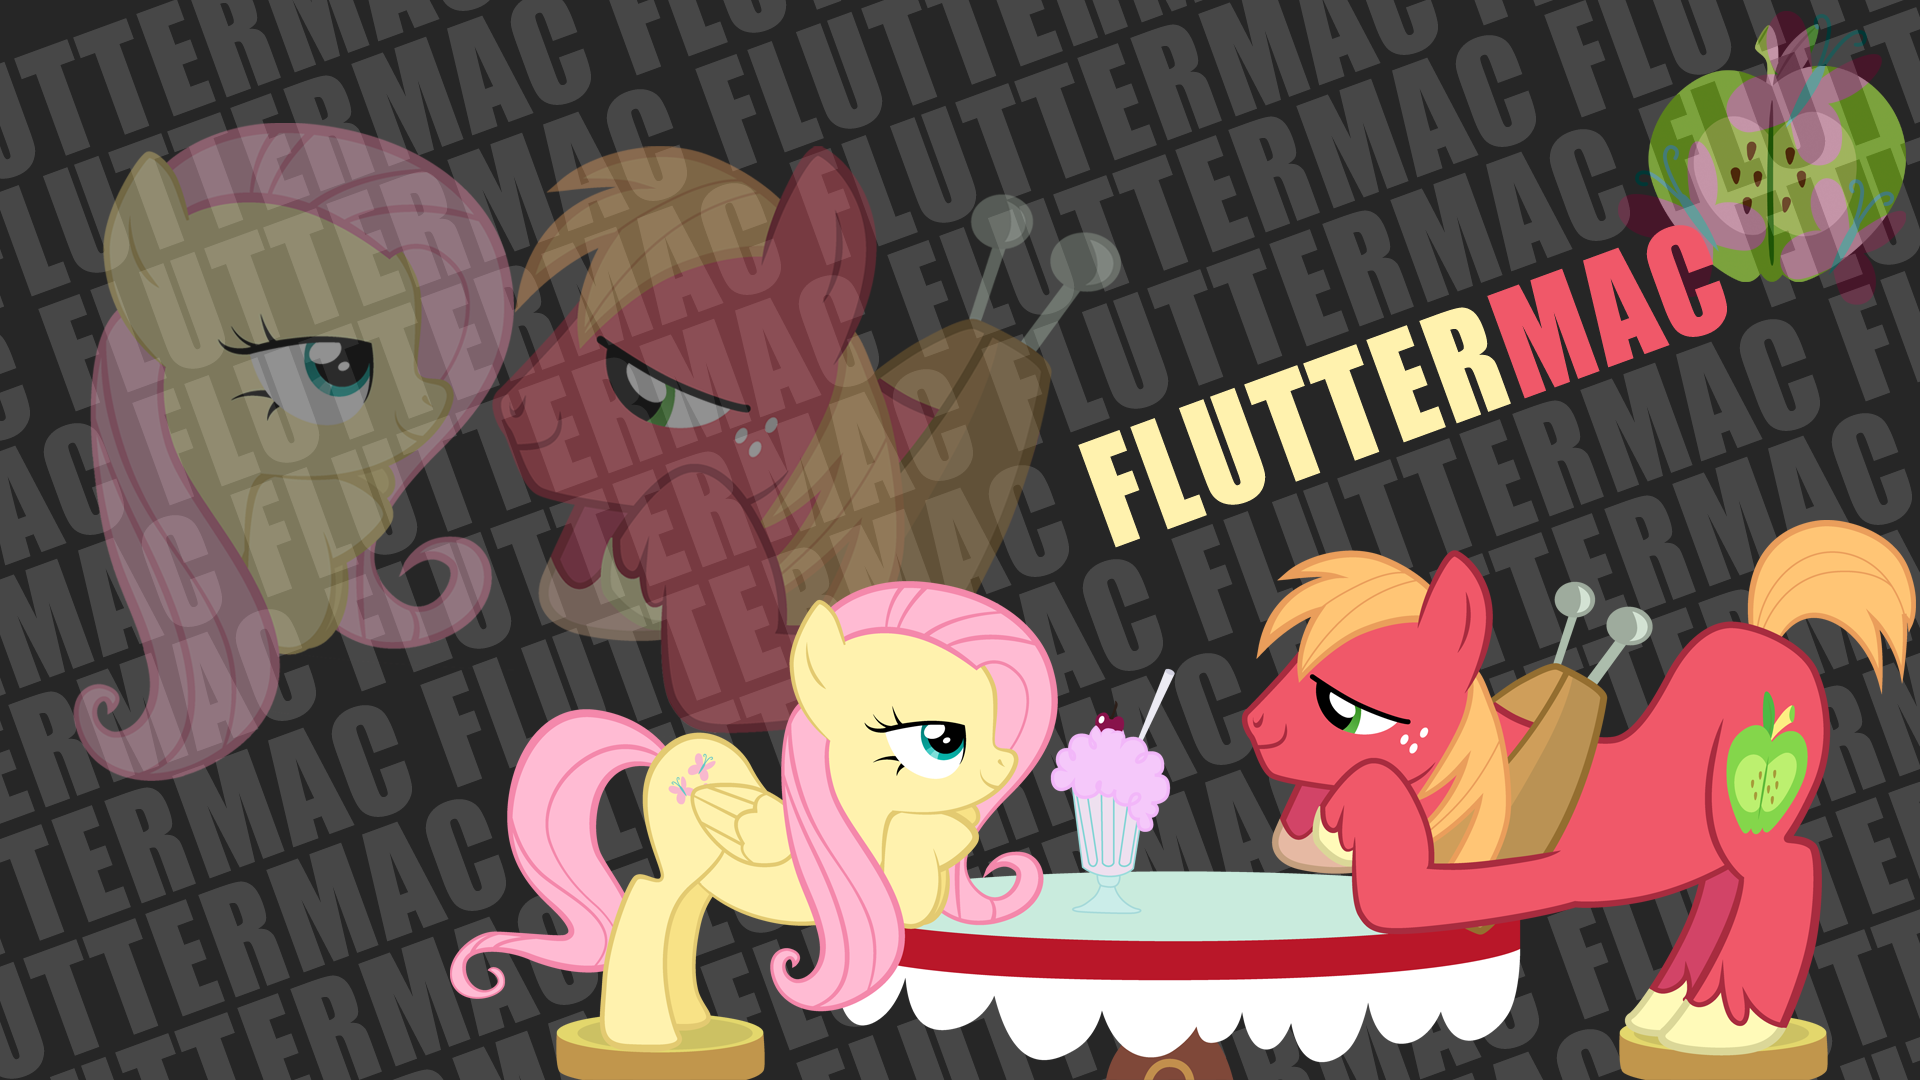 FlutterMac 'Text Name' Wallpaper by ahumeniy, asdflove and BlueDragonHans